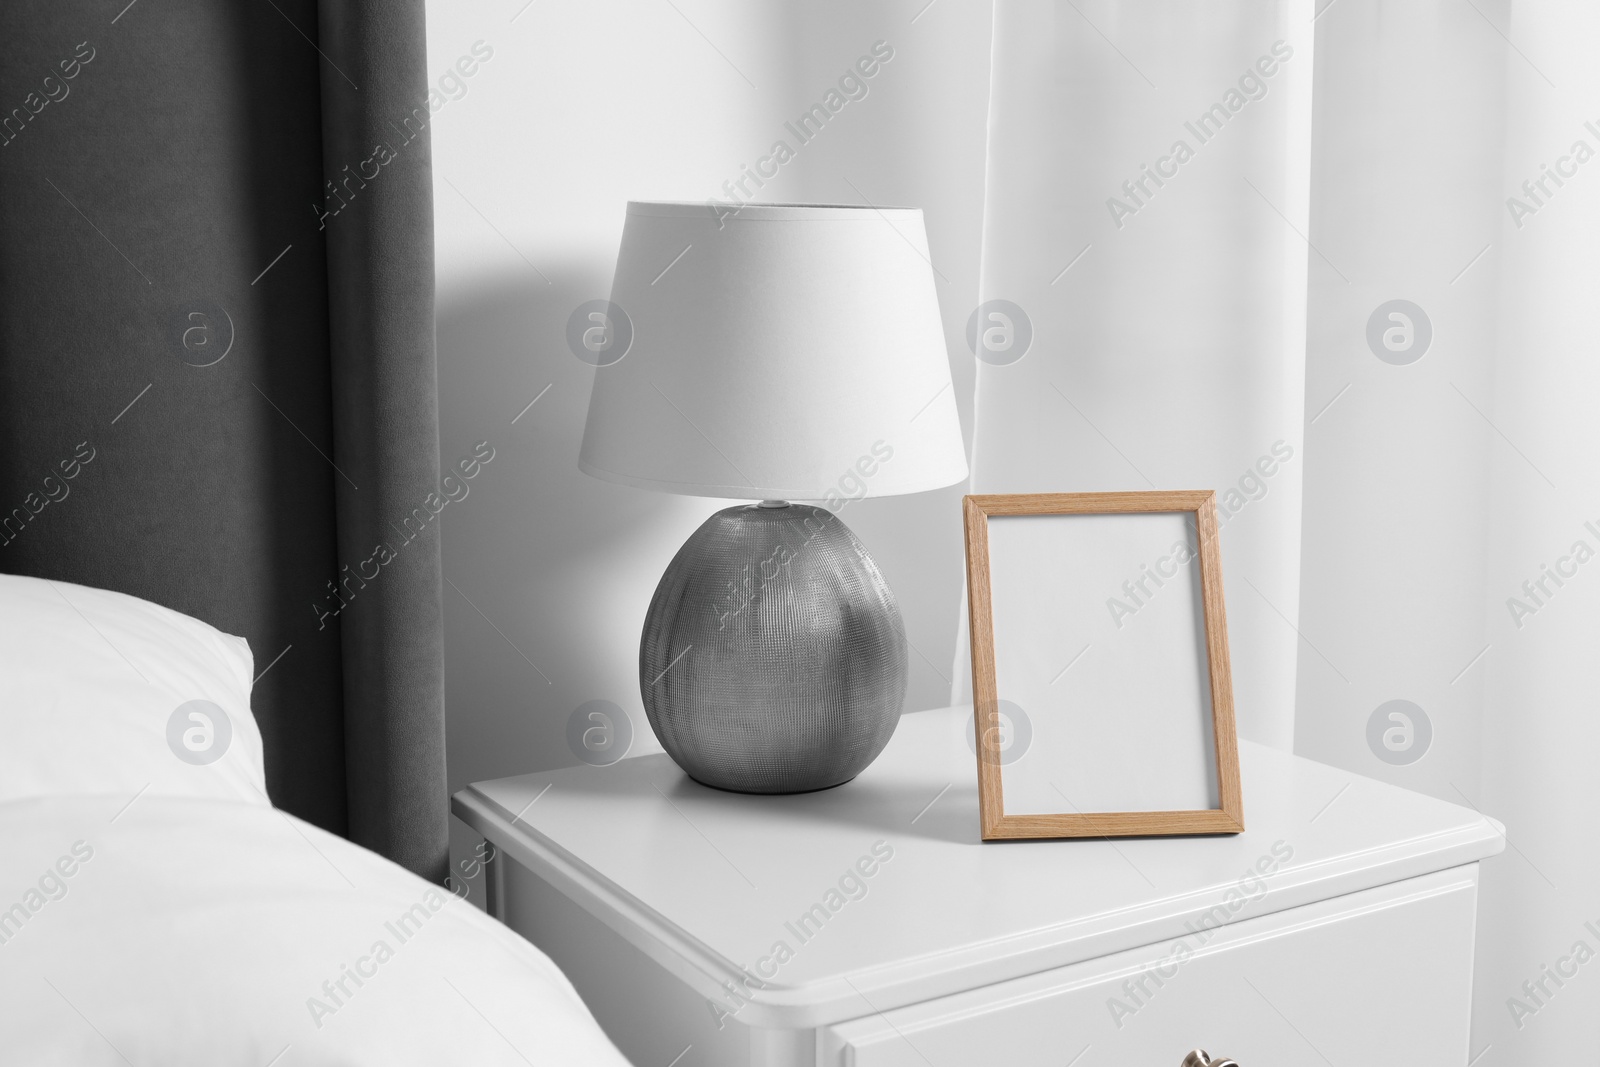 Photo of Empty square frame and lamp on white bedside table in room